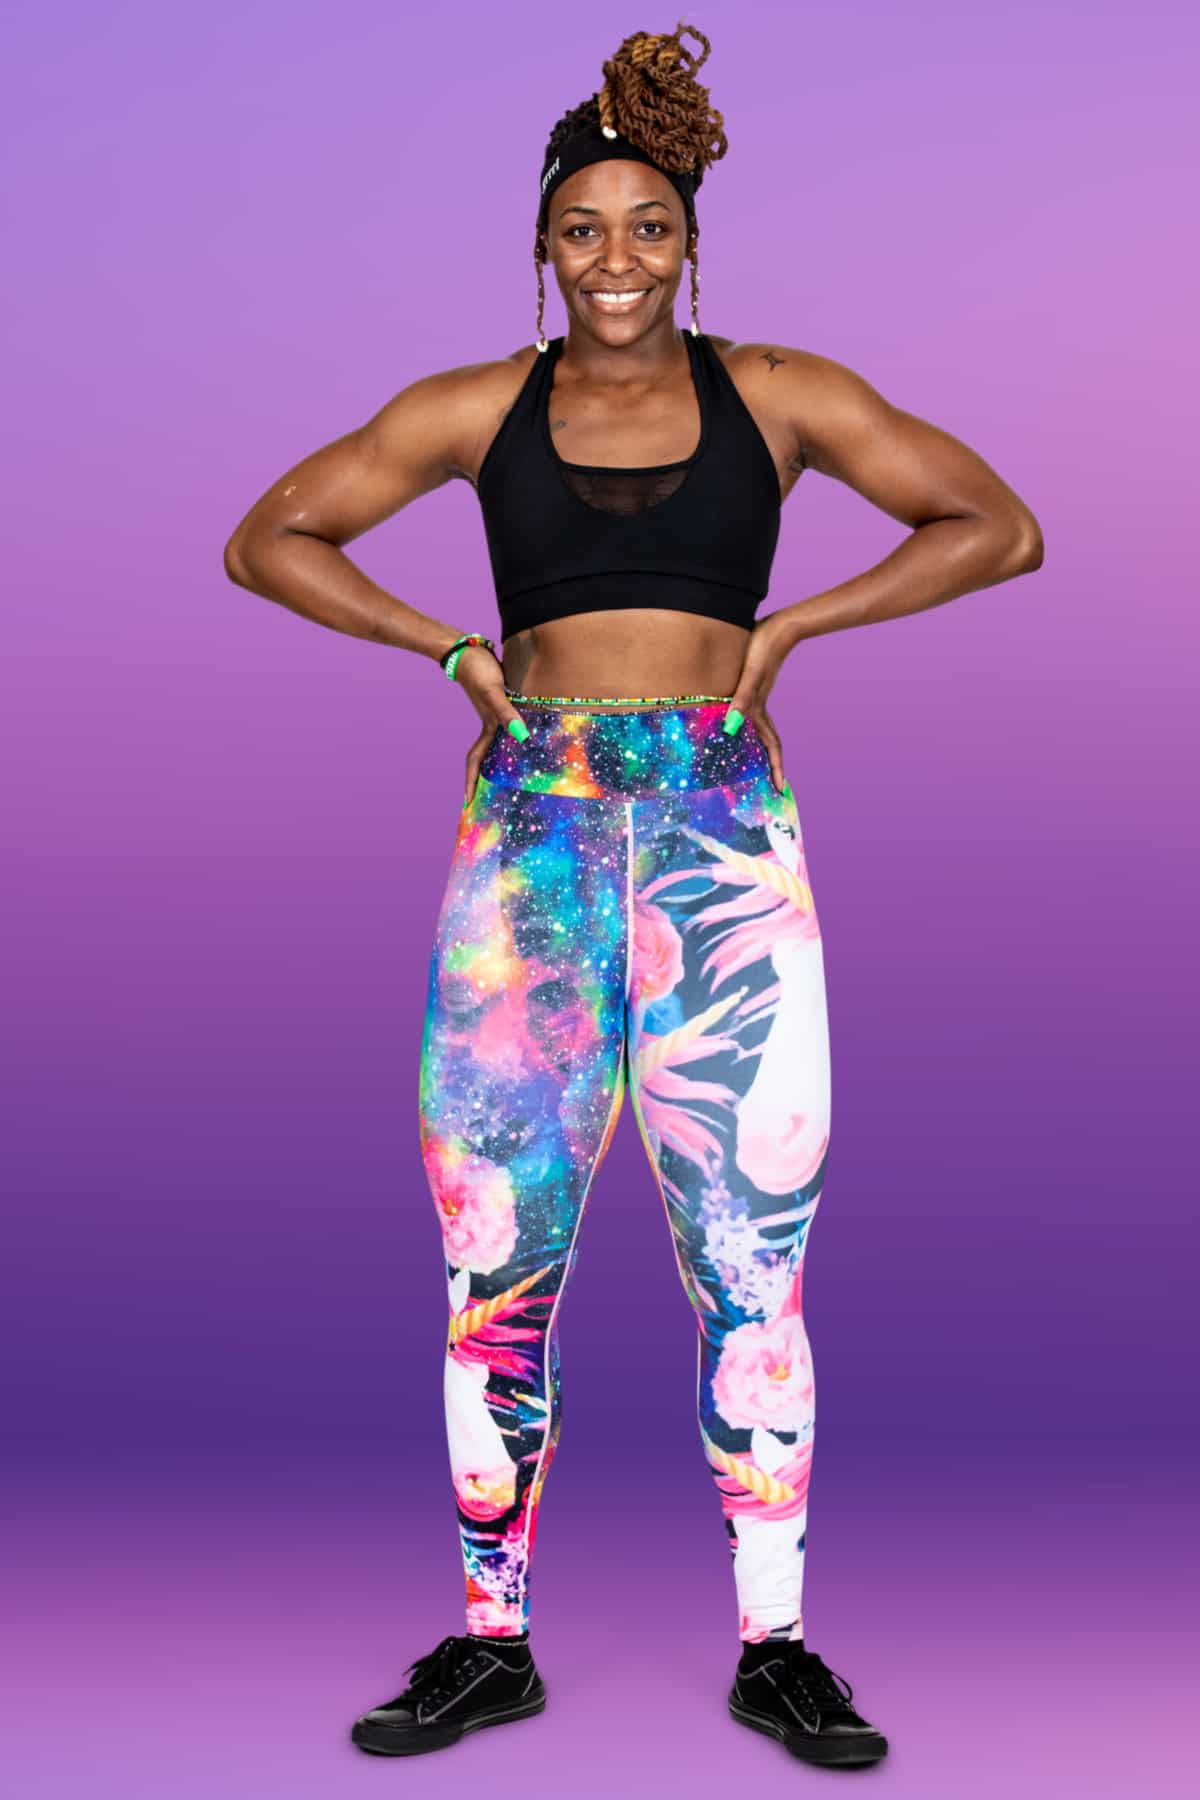 Are Pants, Leggings or Shorts Best for Exercise? – PeachFit Sportswear